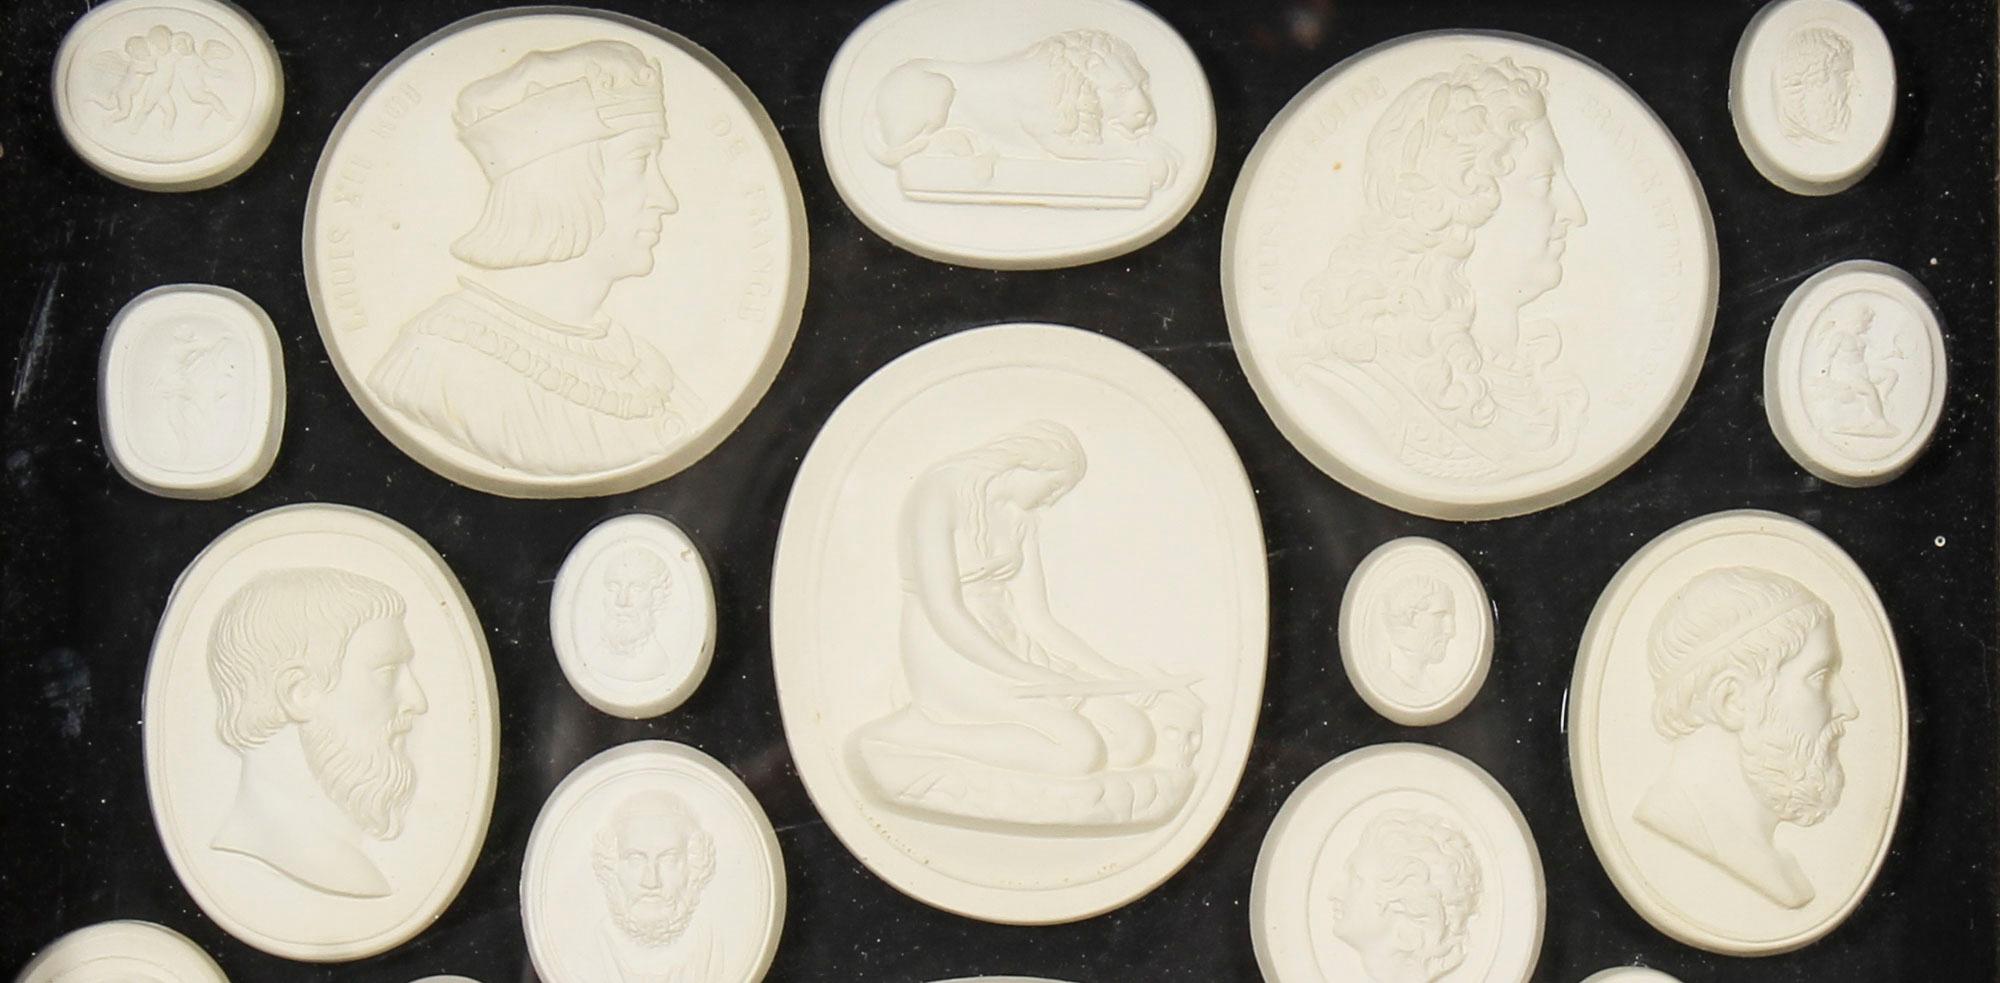 Late 19th Century Set of 40 Plaster Cameo Intaglios of Grand Tour Medieval & 19th Century Subjects